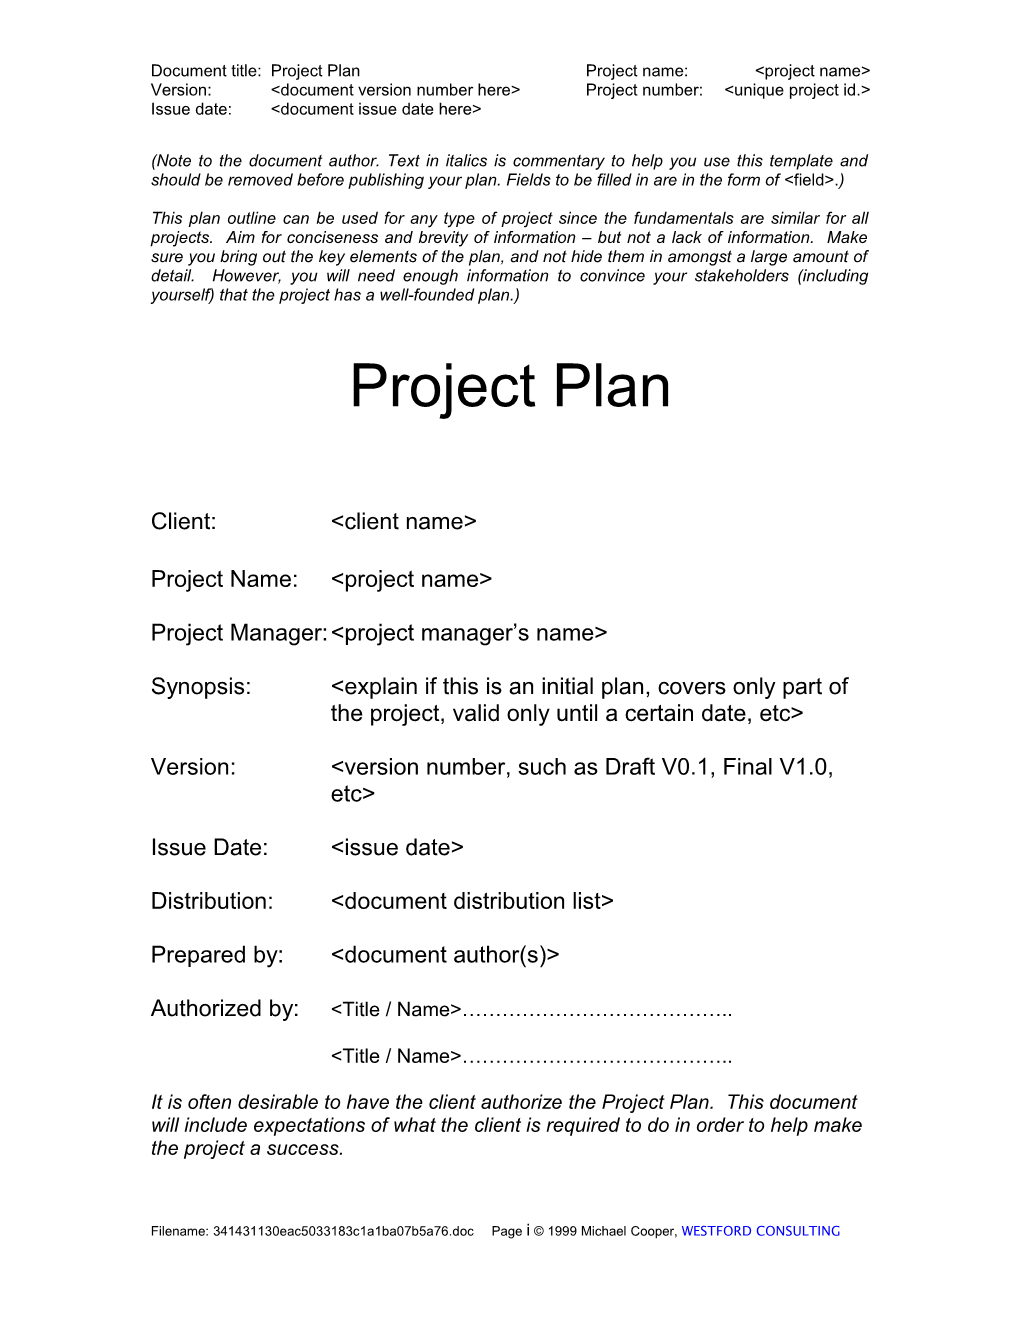 Document Title:Project Planproject Name:<Project Name>